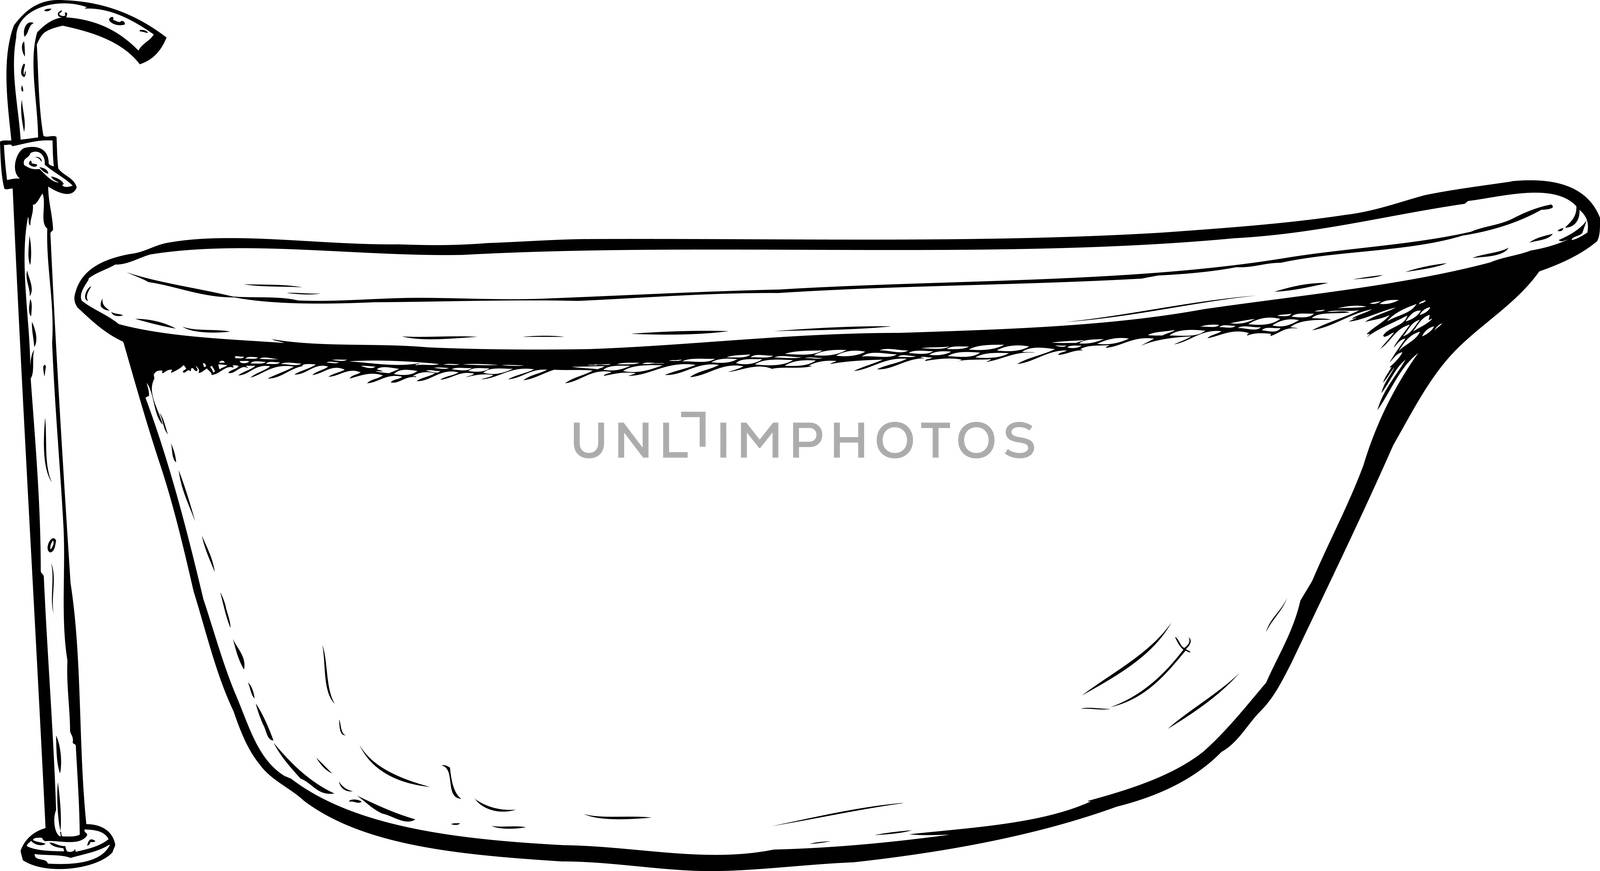 Outlined side view on bath tub by TheBlackRhino